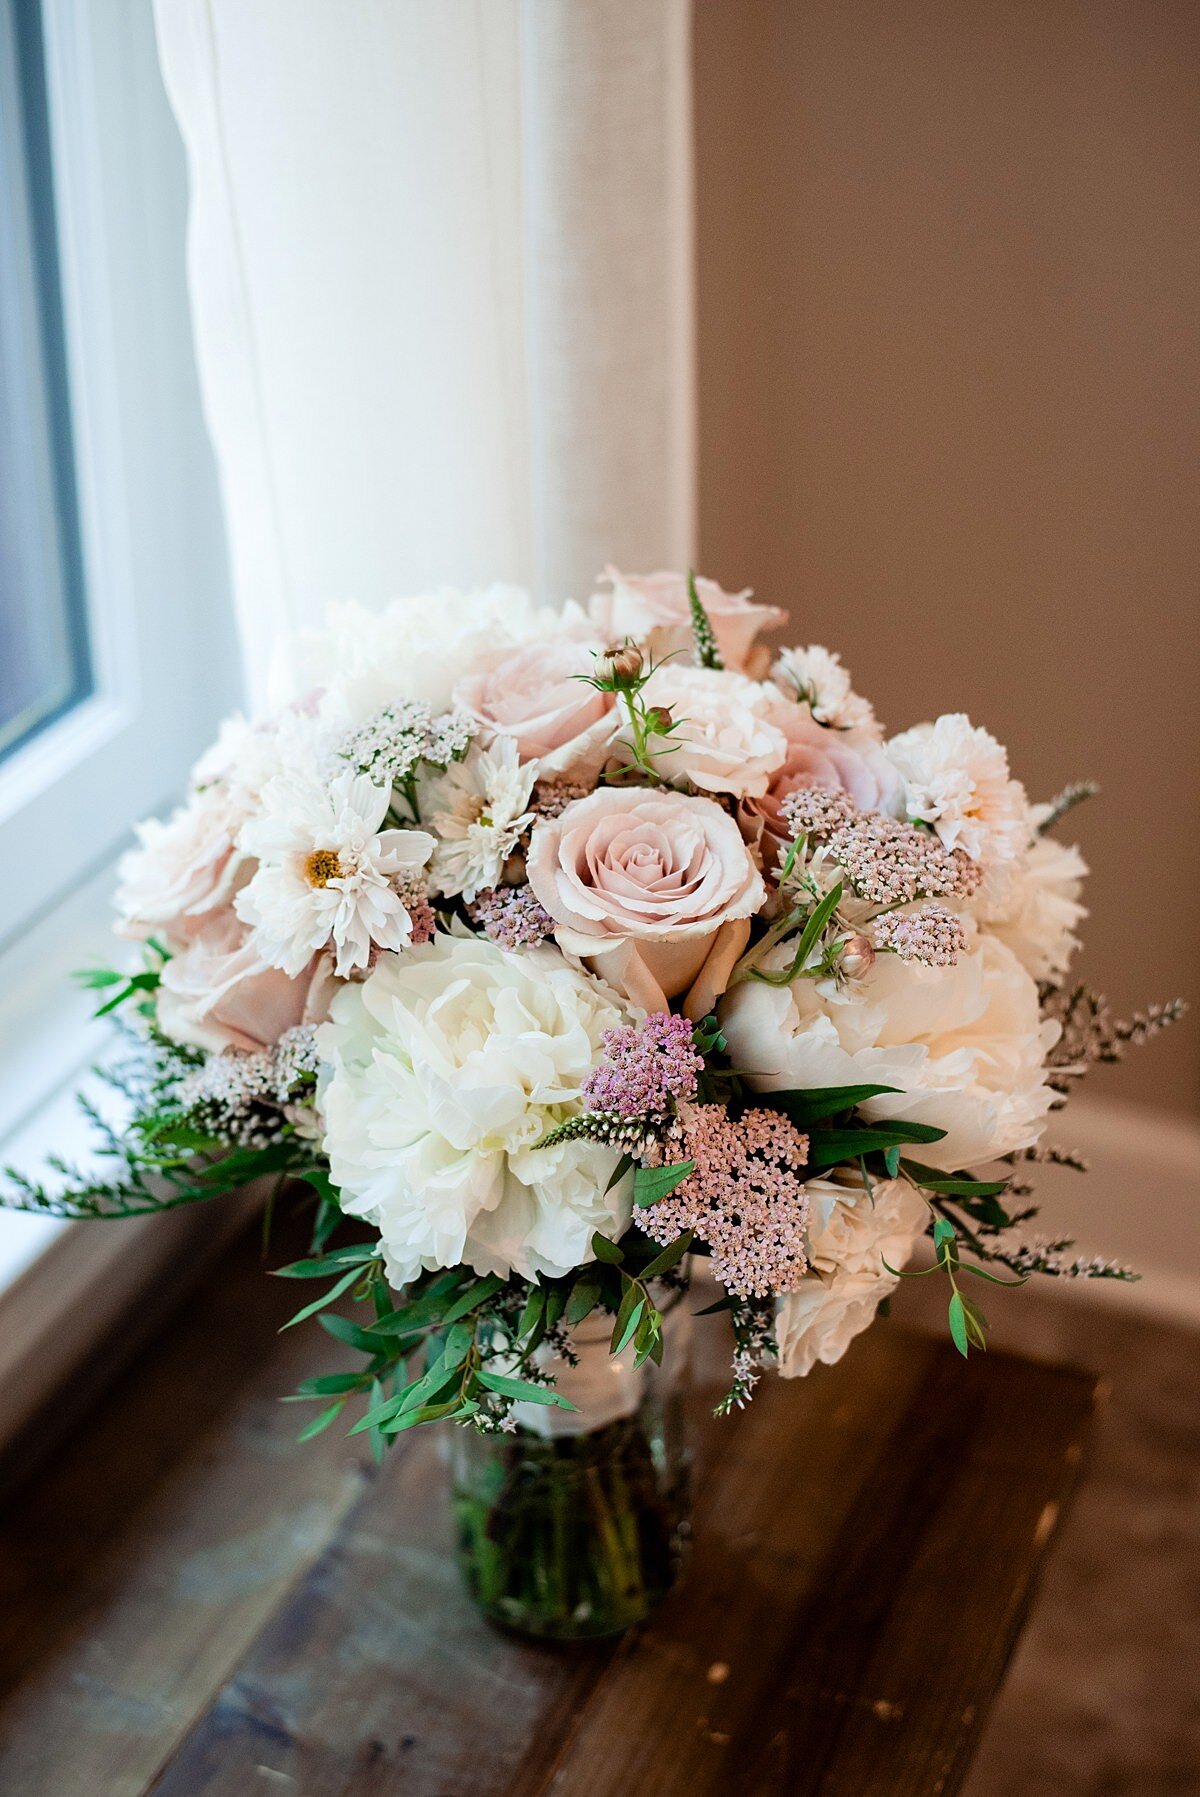 Bridal bouquet of white peonies, blush roses, white dahlias and pink rice flower accented with greenery sits in a glass vase on a window sill.